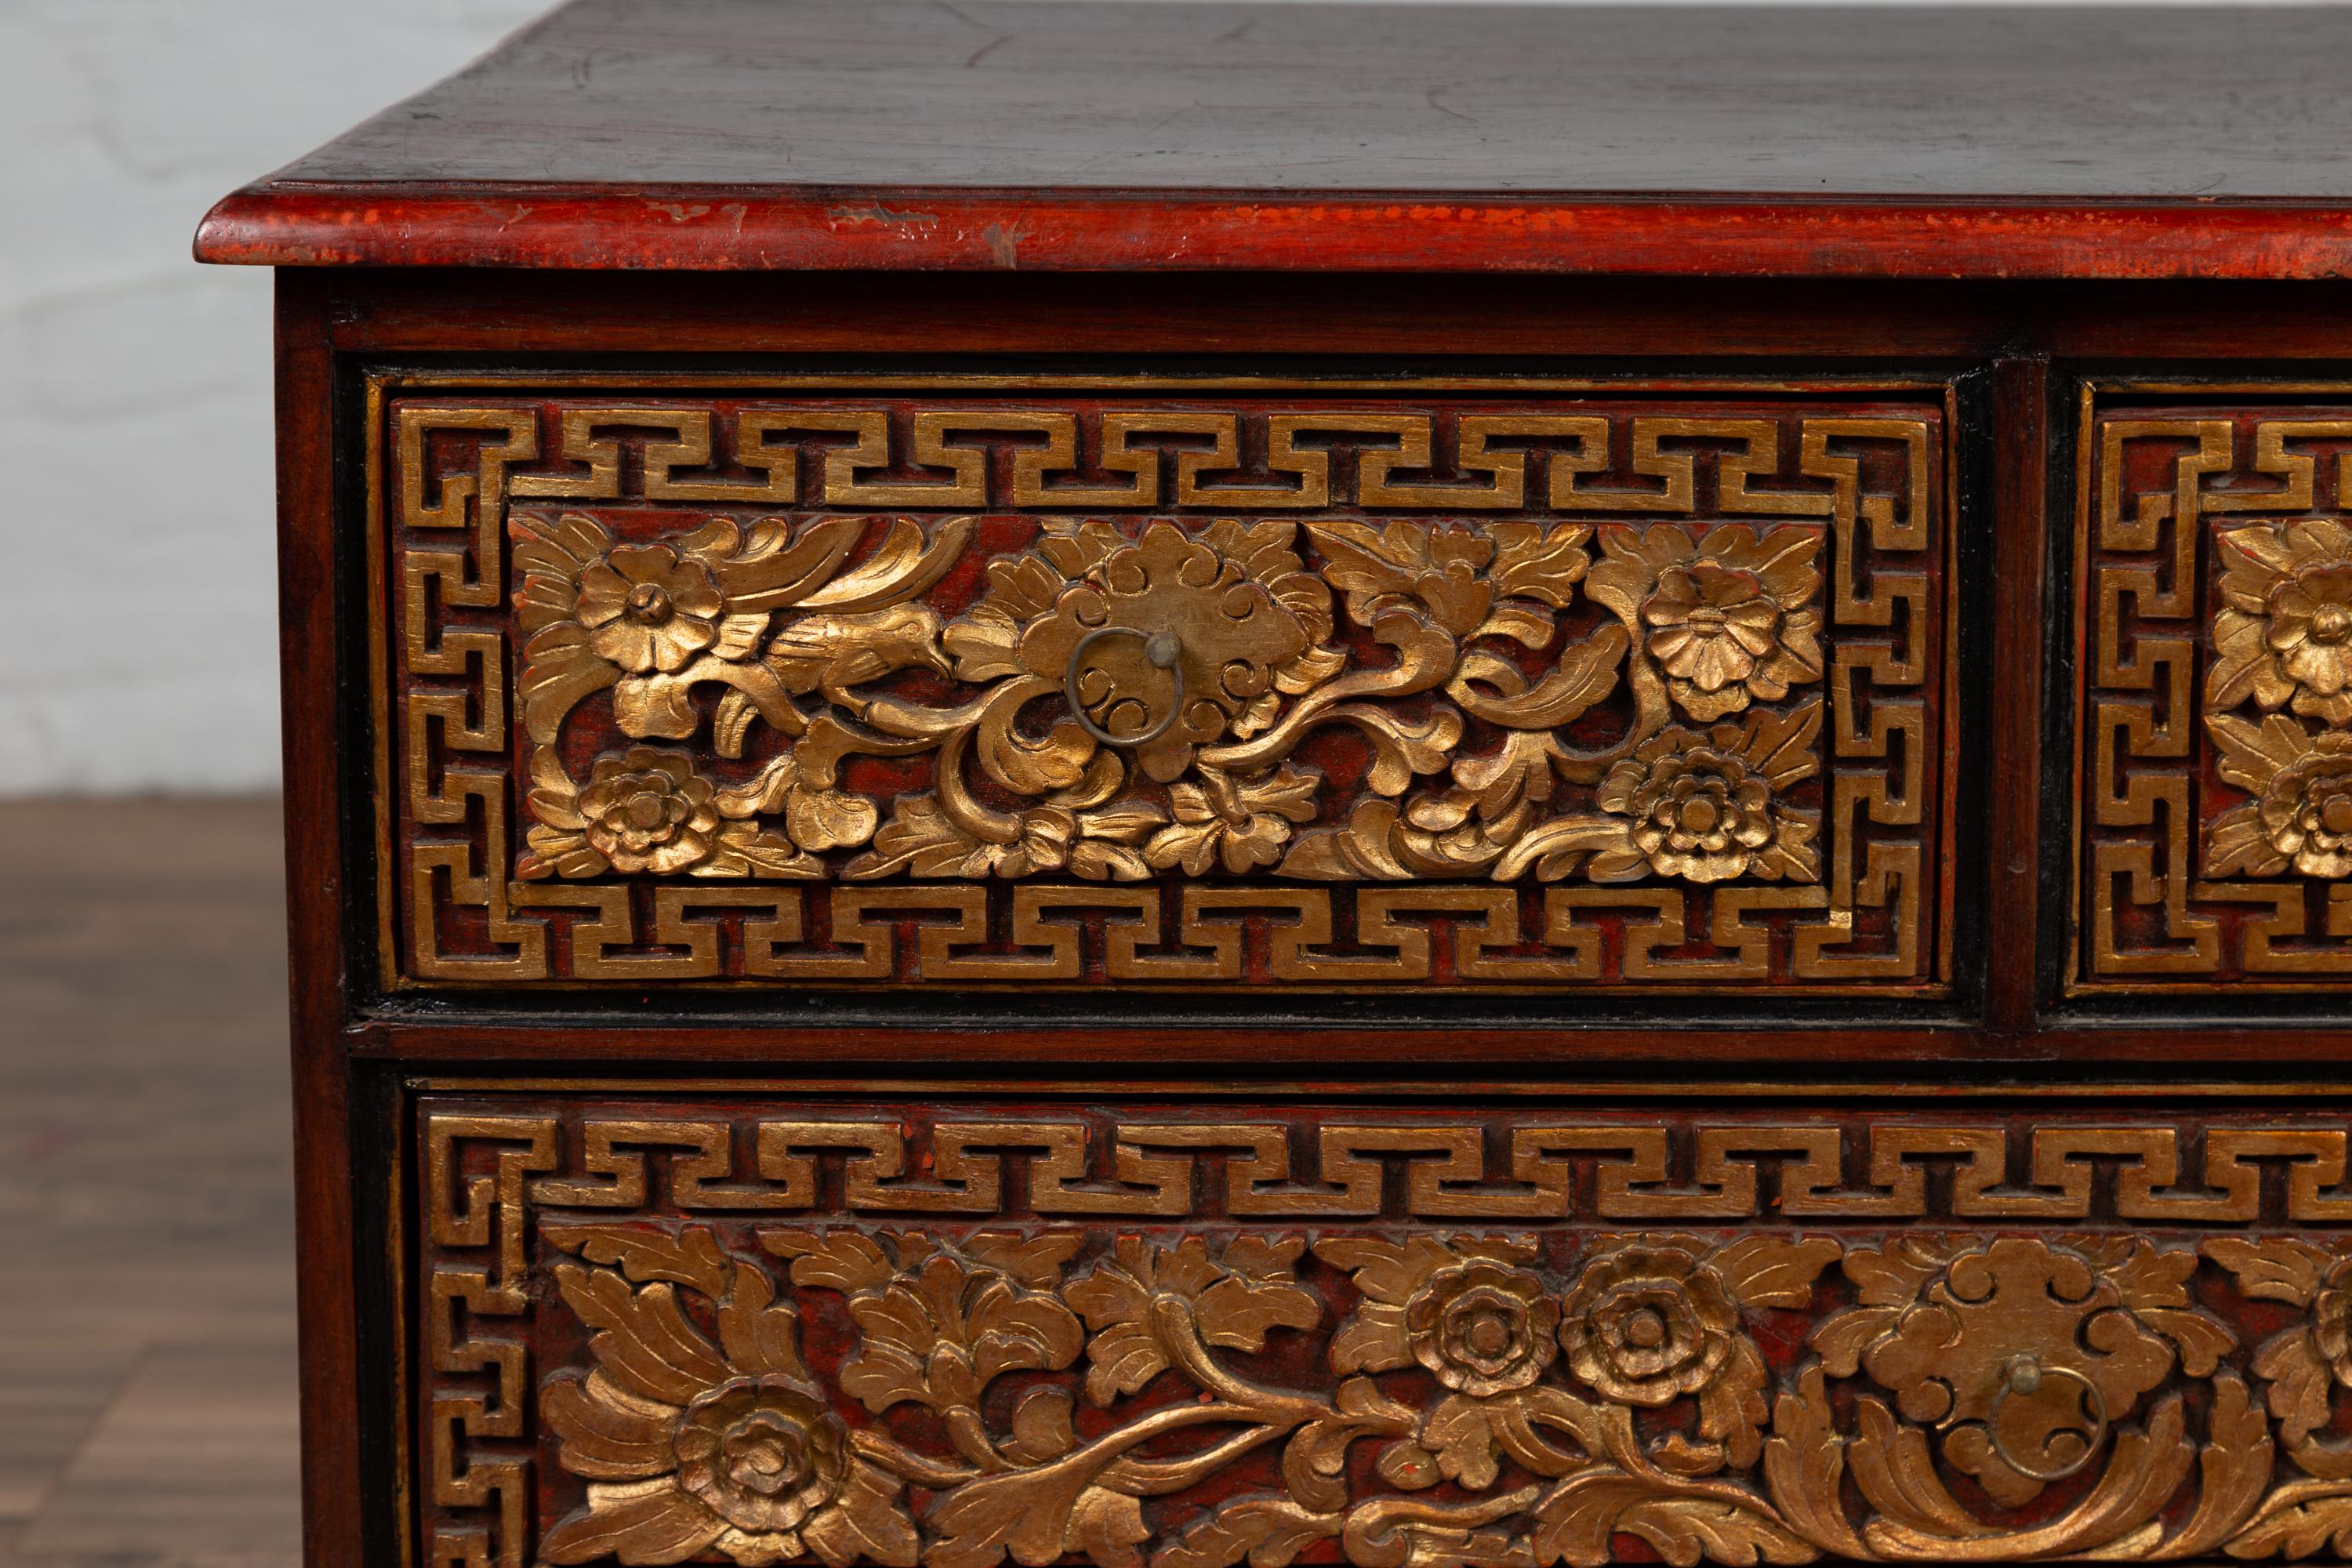 20th Century Three-Drawer Dresser from Madura with Richly Carved Floral Decor and Greek Key